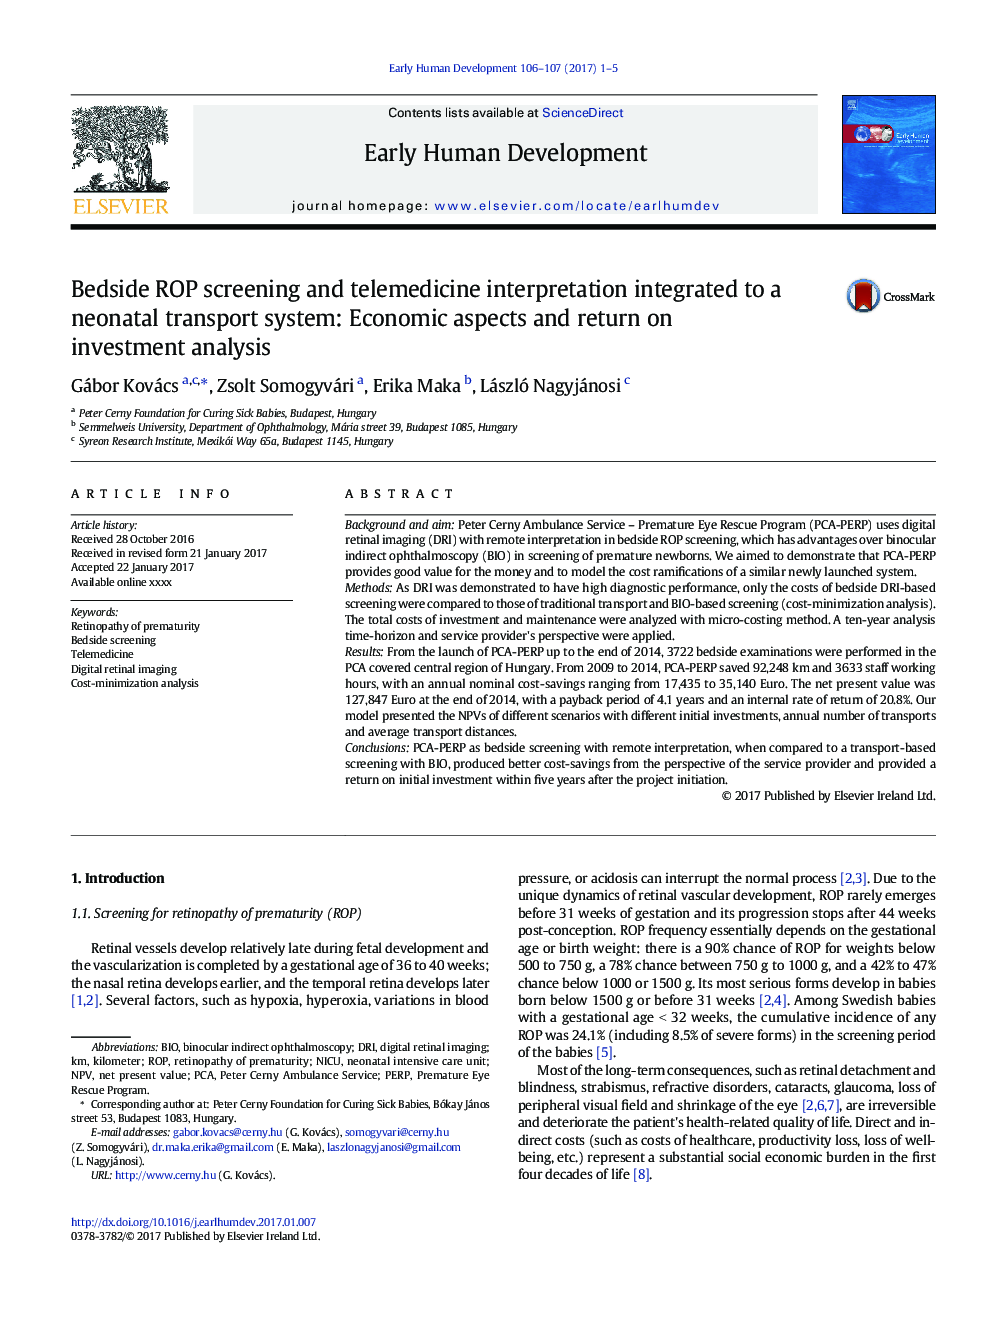 Bedside ROP screening and telemedicine interpretation integrated to a neonatal transport system: Economic aspects and return on investment analysis